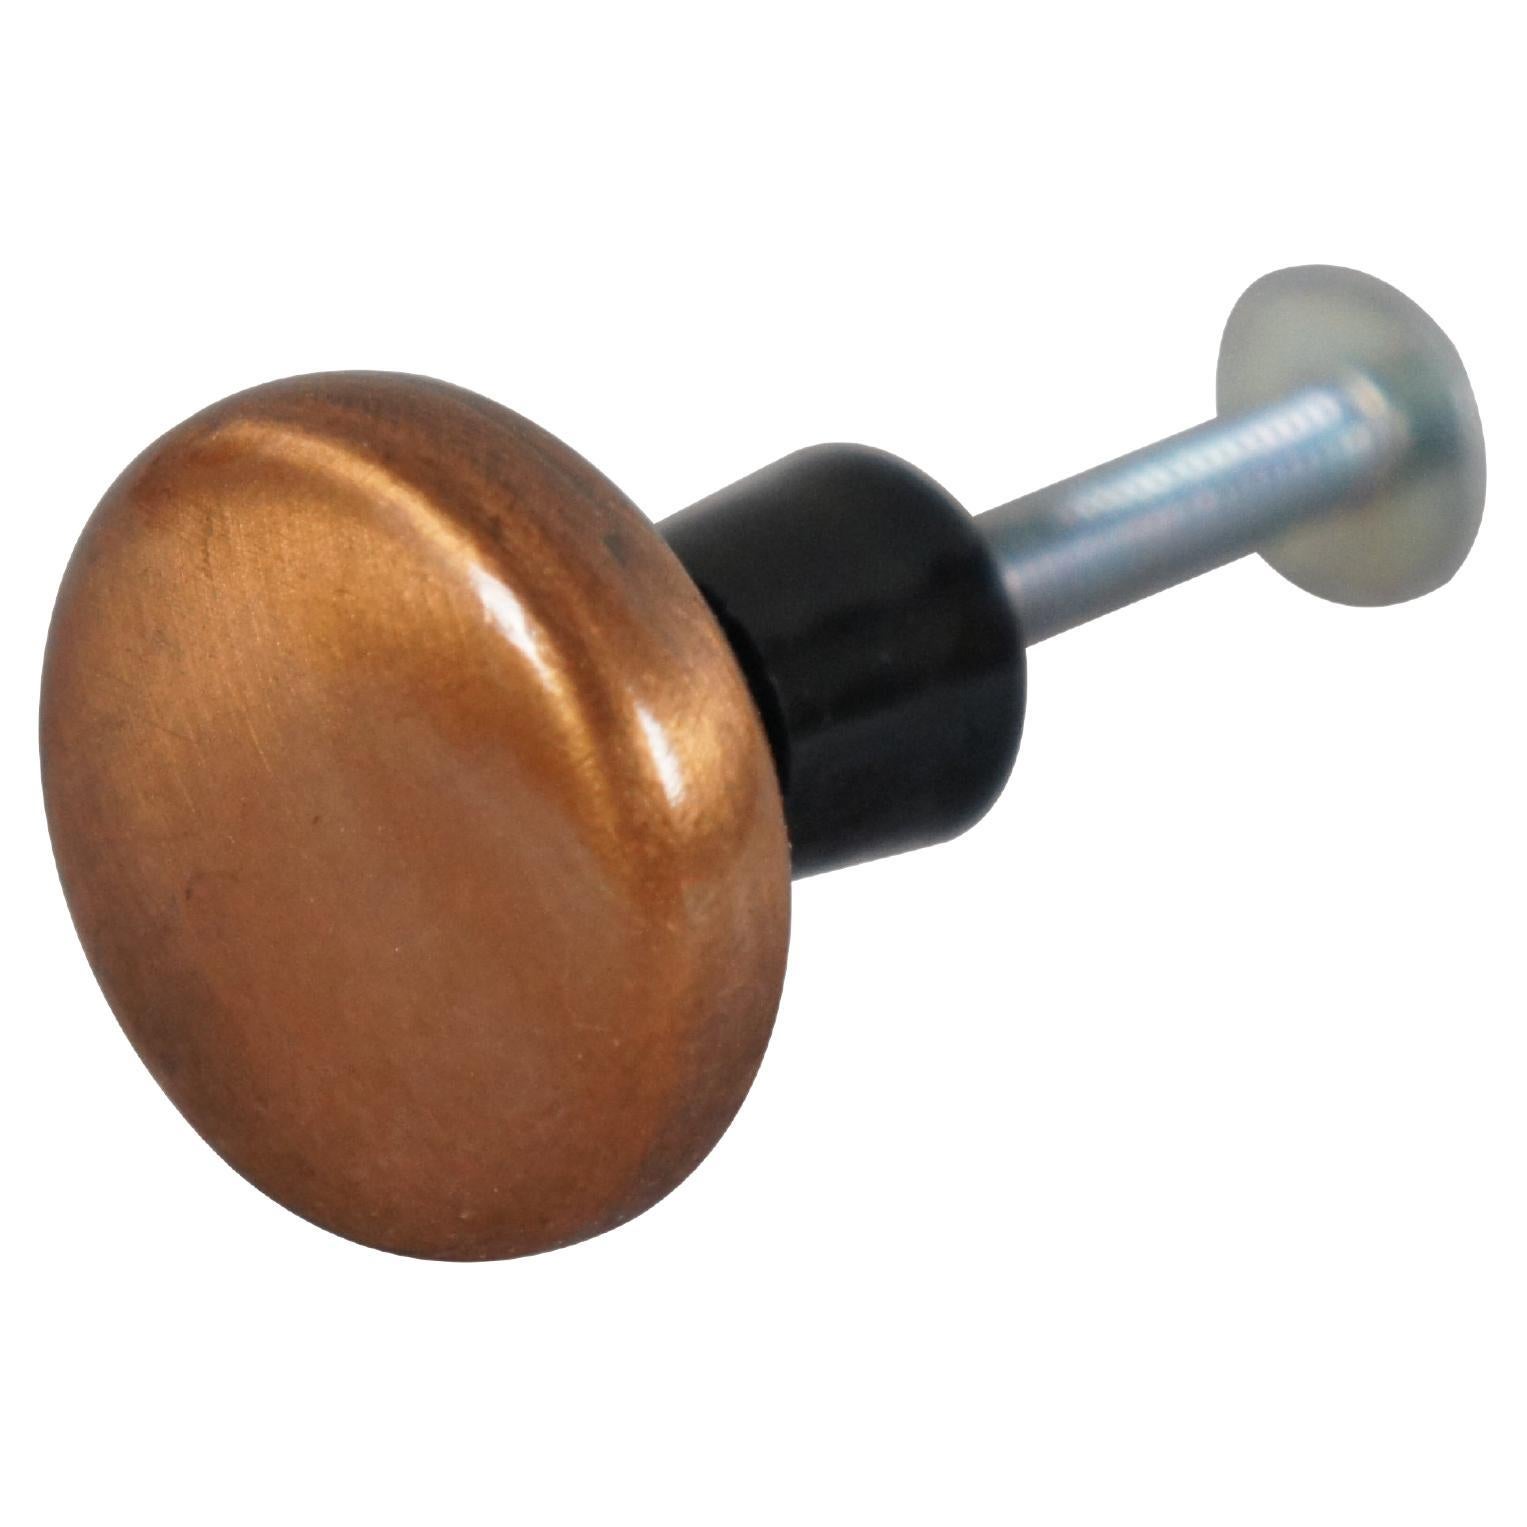 National Lock Co Medalist Round Copper Drawer Pulls Knob MCM For Sale